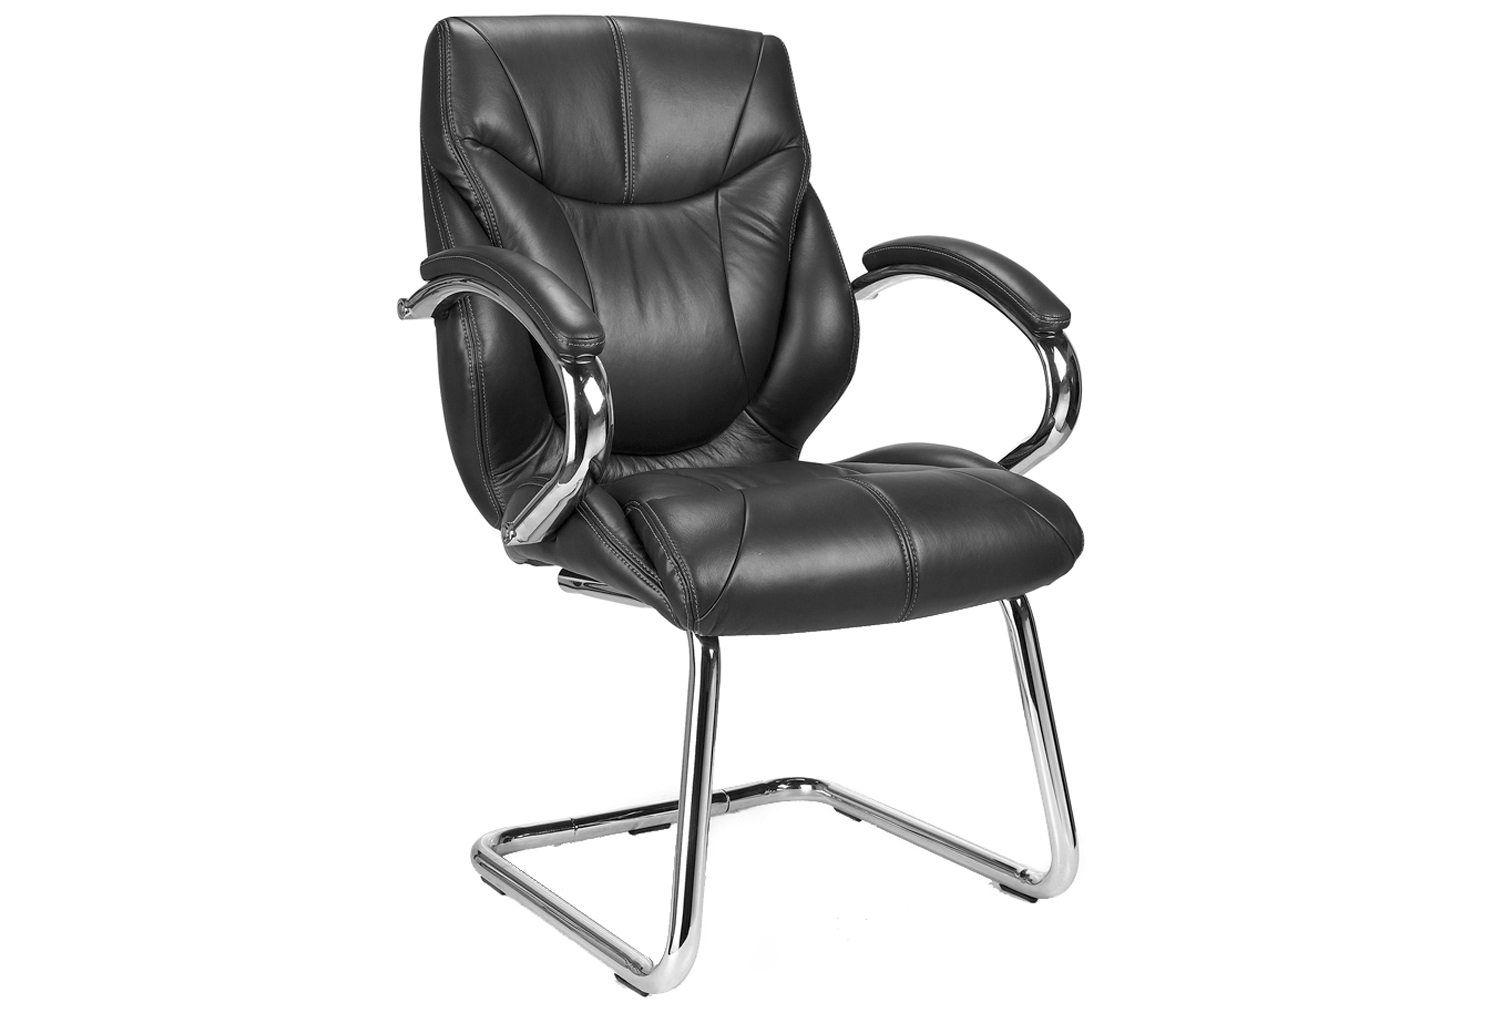 Kintyre Black Leather Faced Cantilever Office Chair, Black, Fully Installed